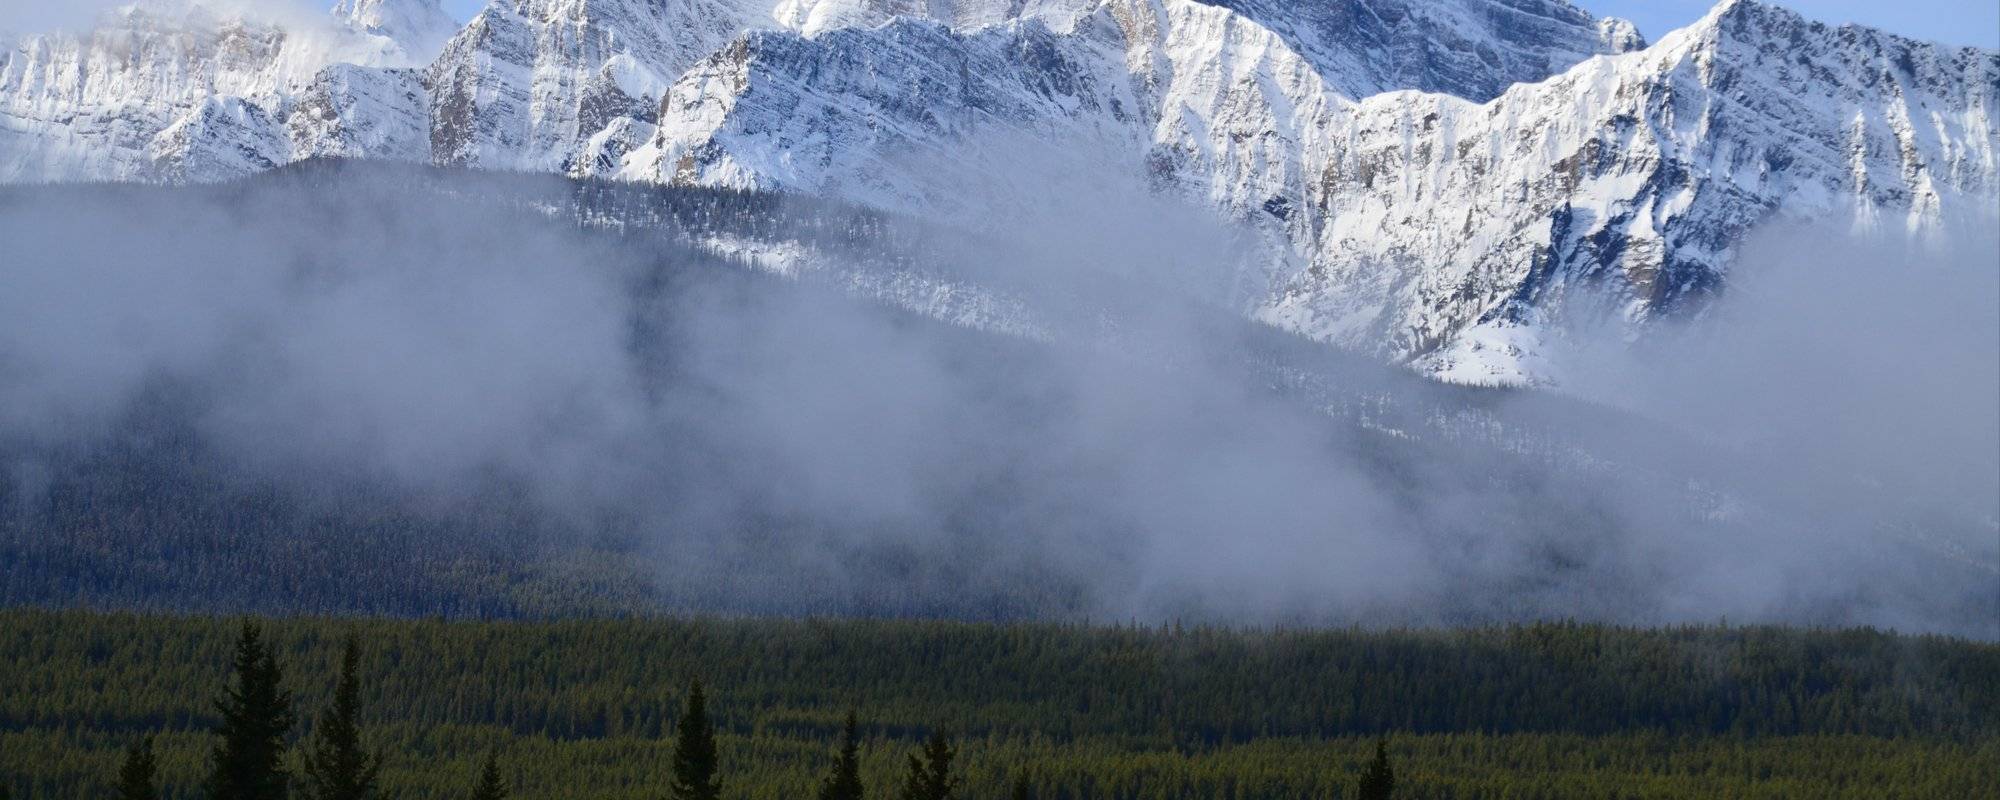 Canadian Rockies: The road to Lake Louise, A dirty hidden history?